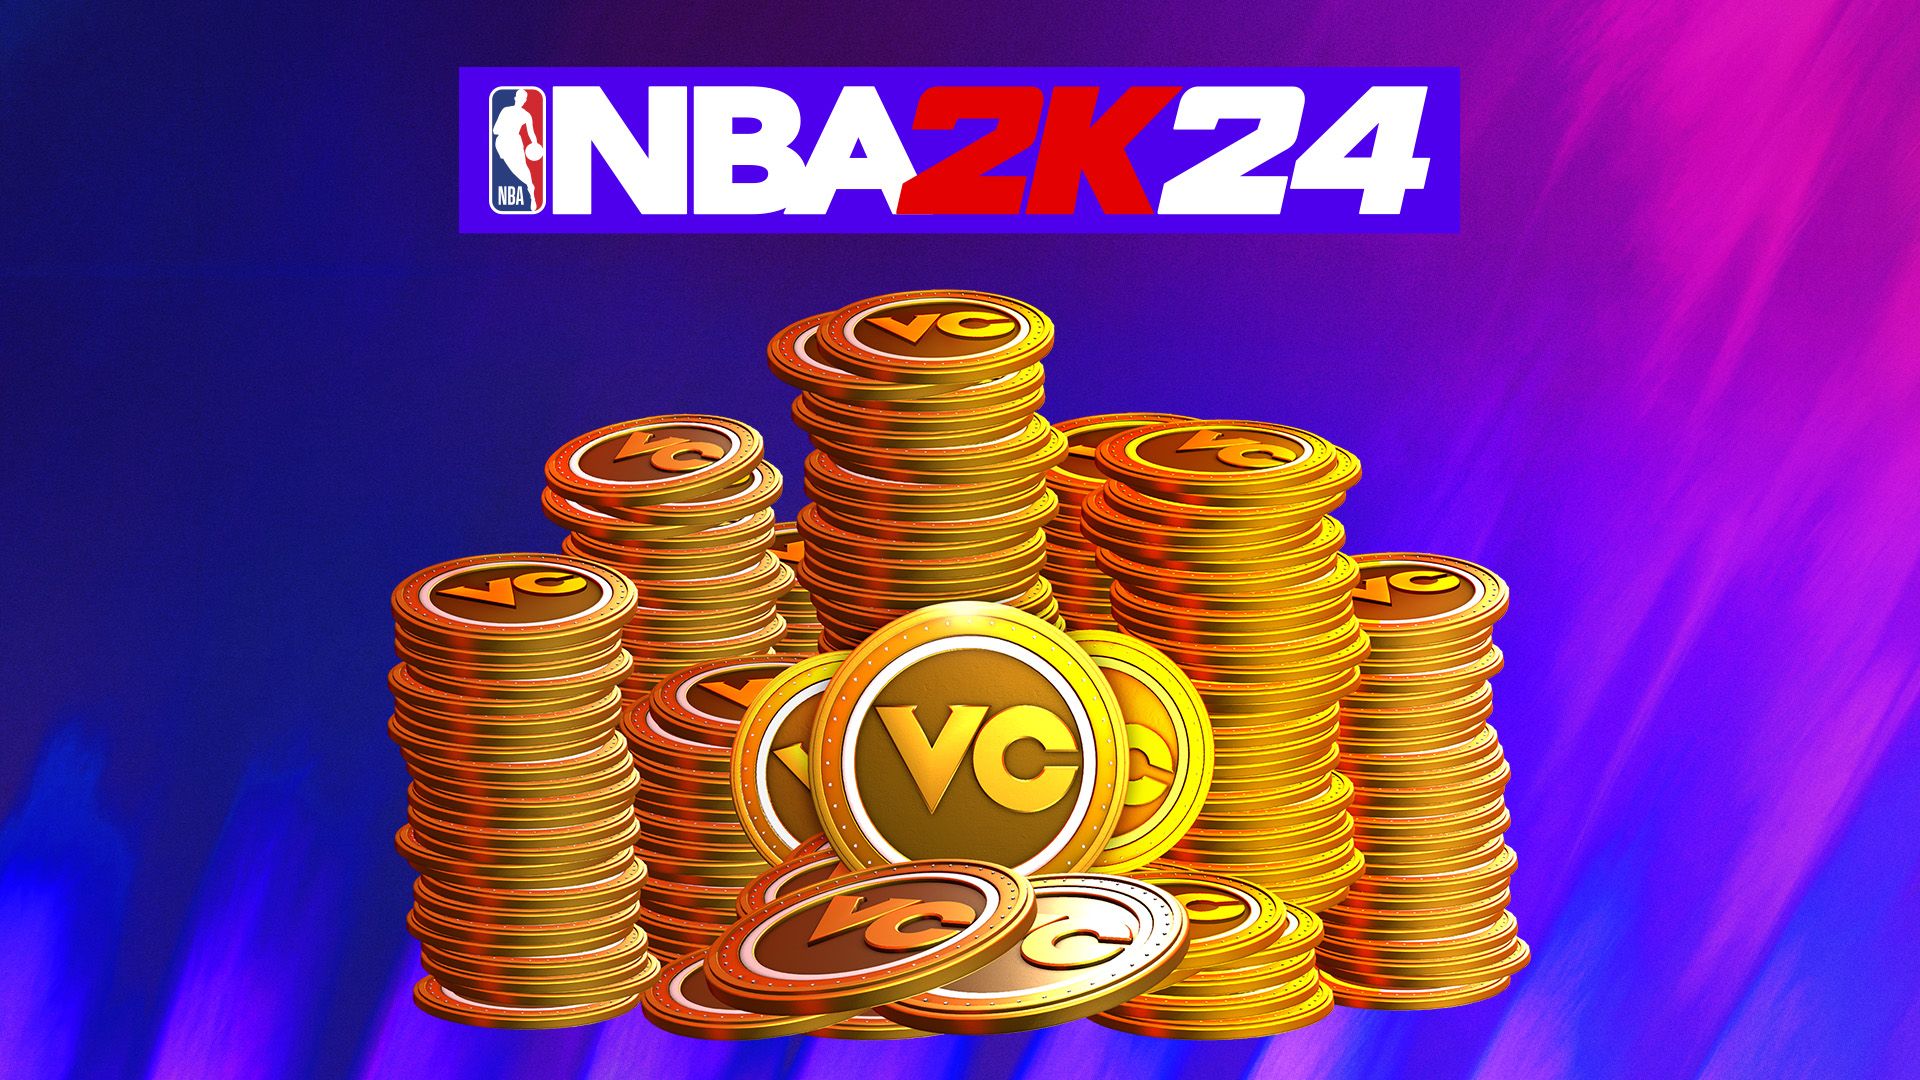 cheapest way to get VC in NBA 2K24